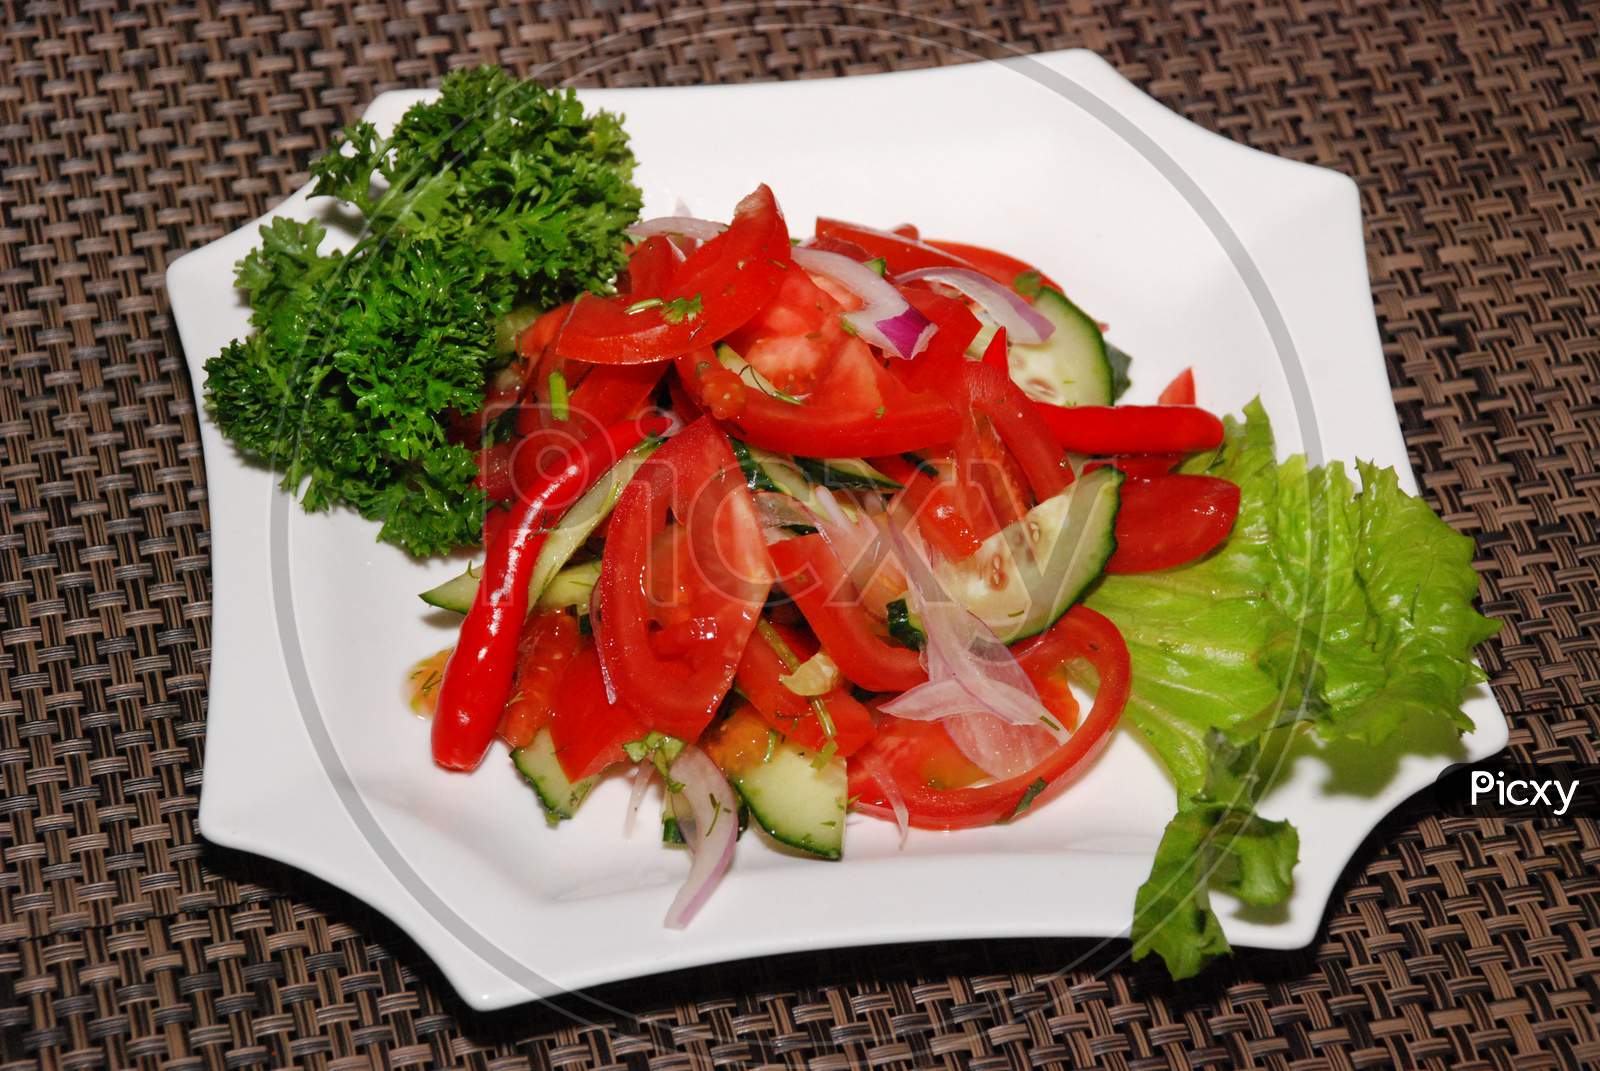 Vegetable Salad With Tomatoes On The White Plate